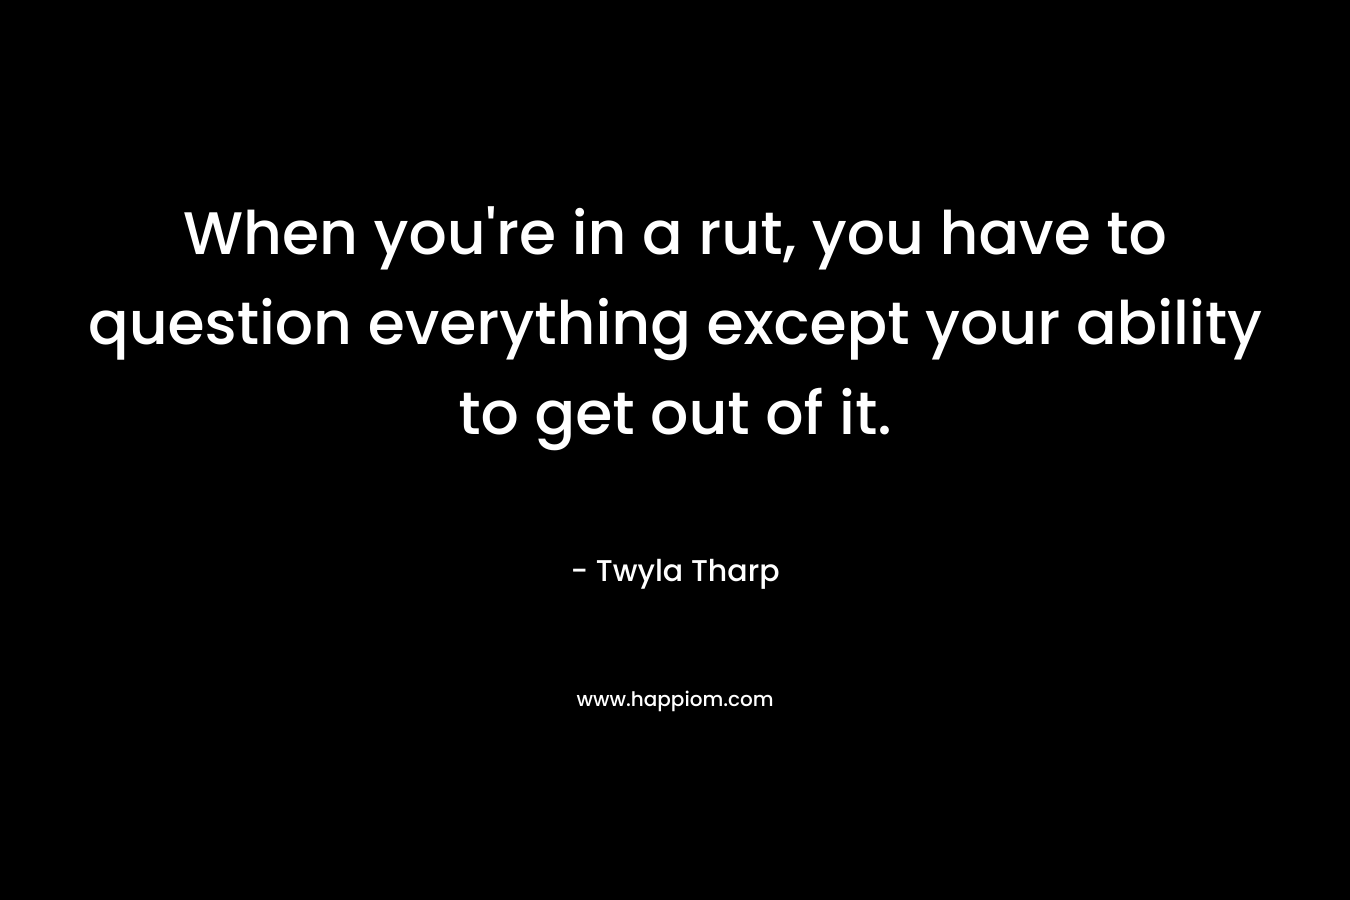 When you’re in a rut, you have to question everything except your ability to get out of it. – Twyla Tharp